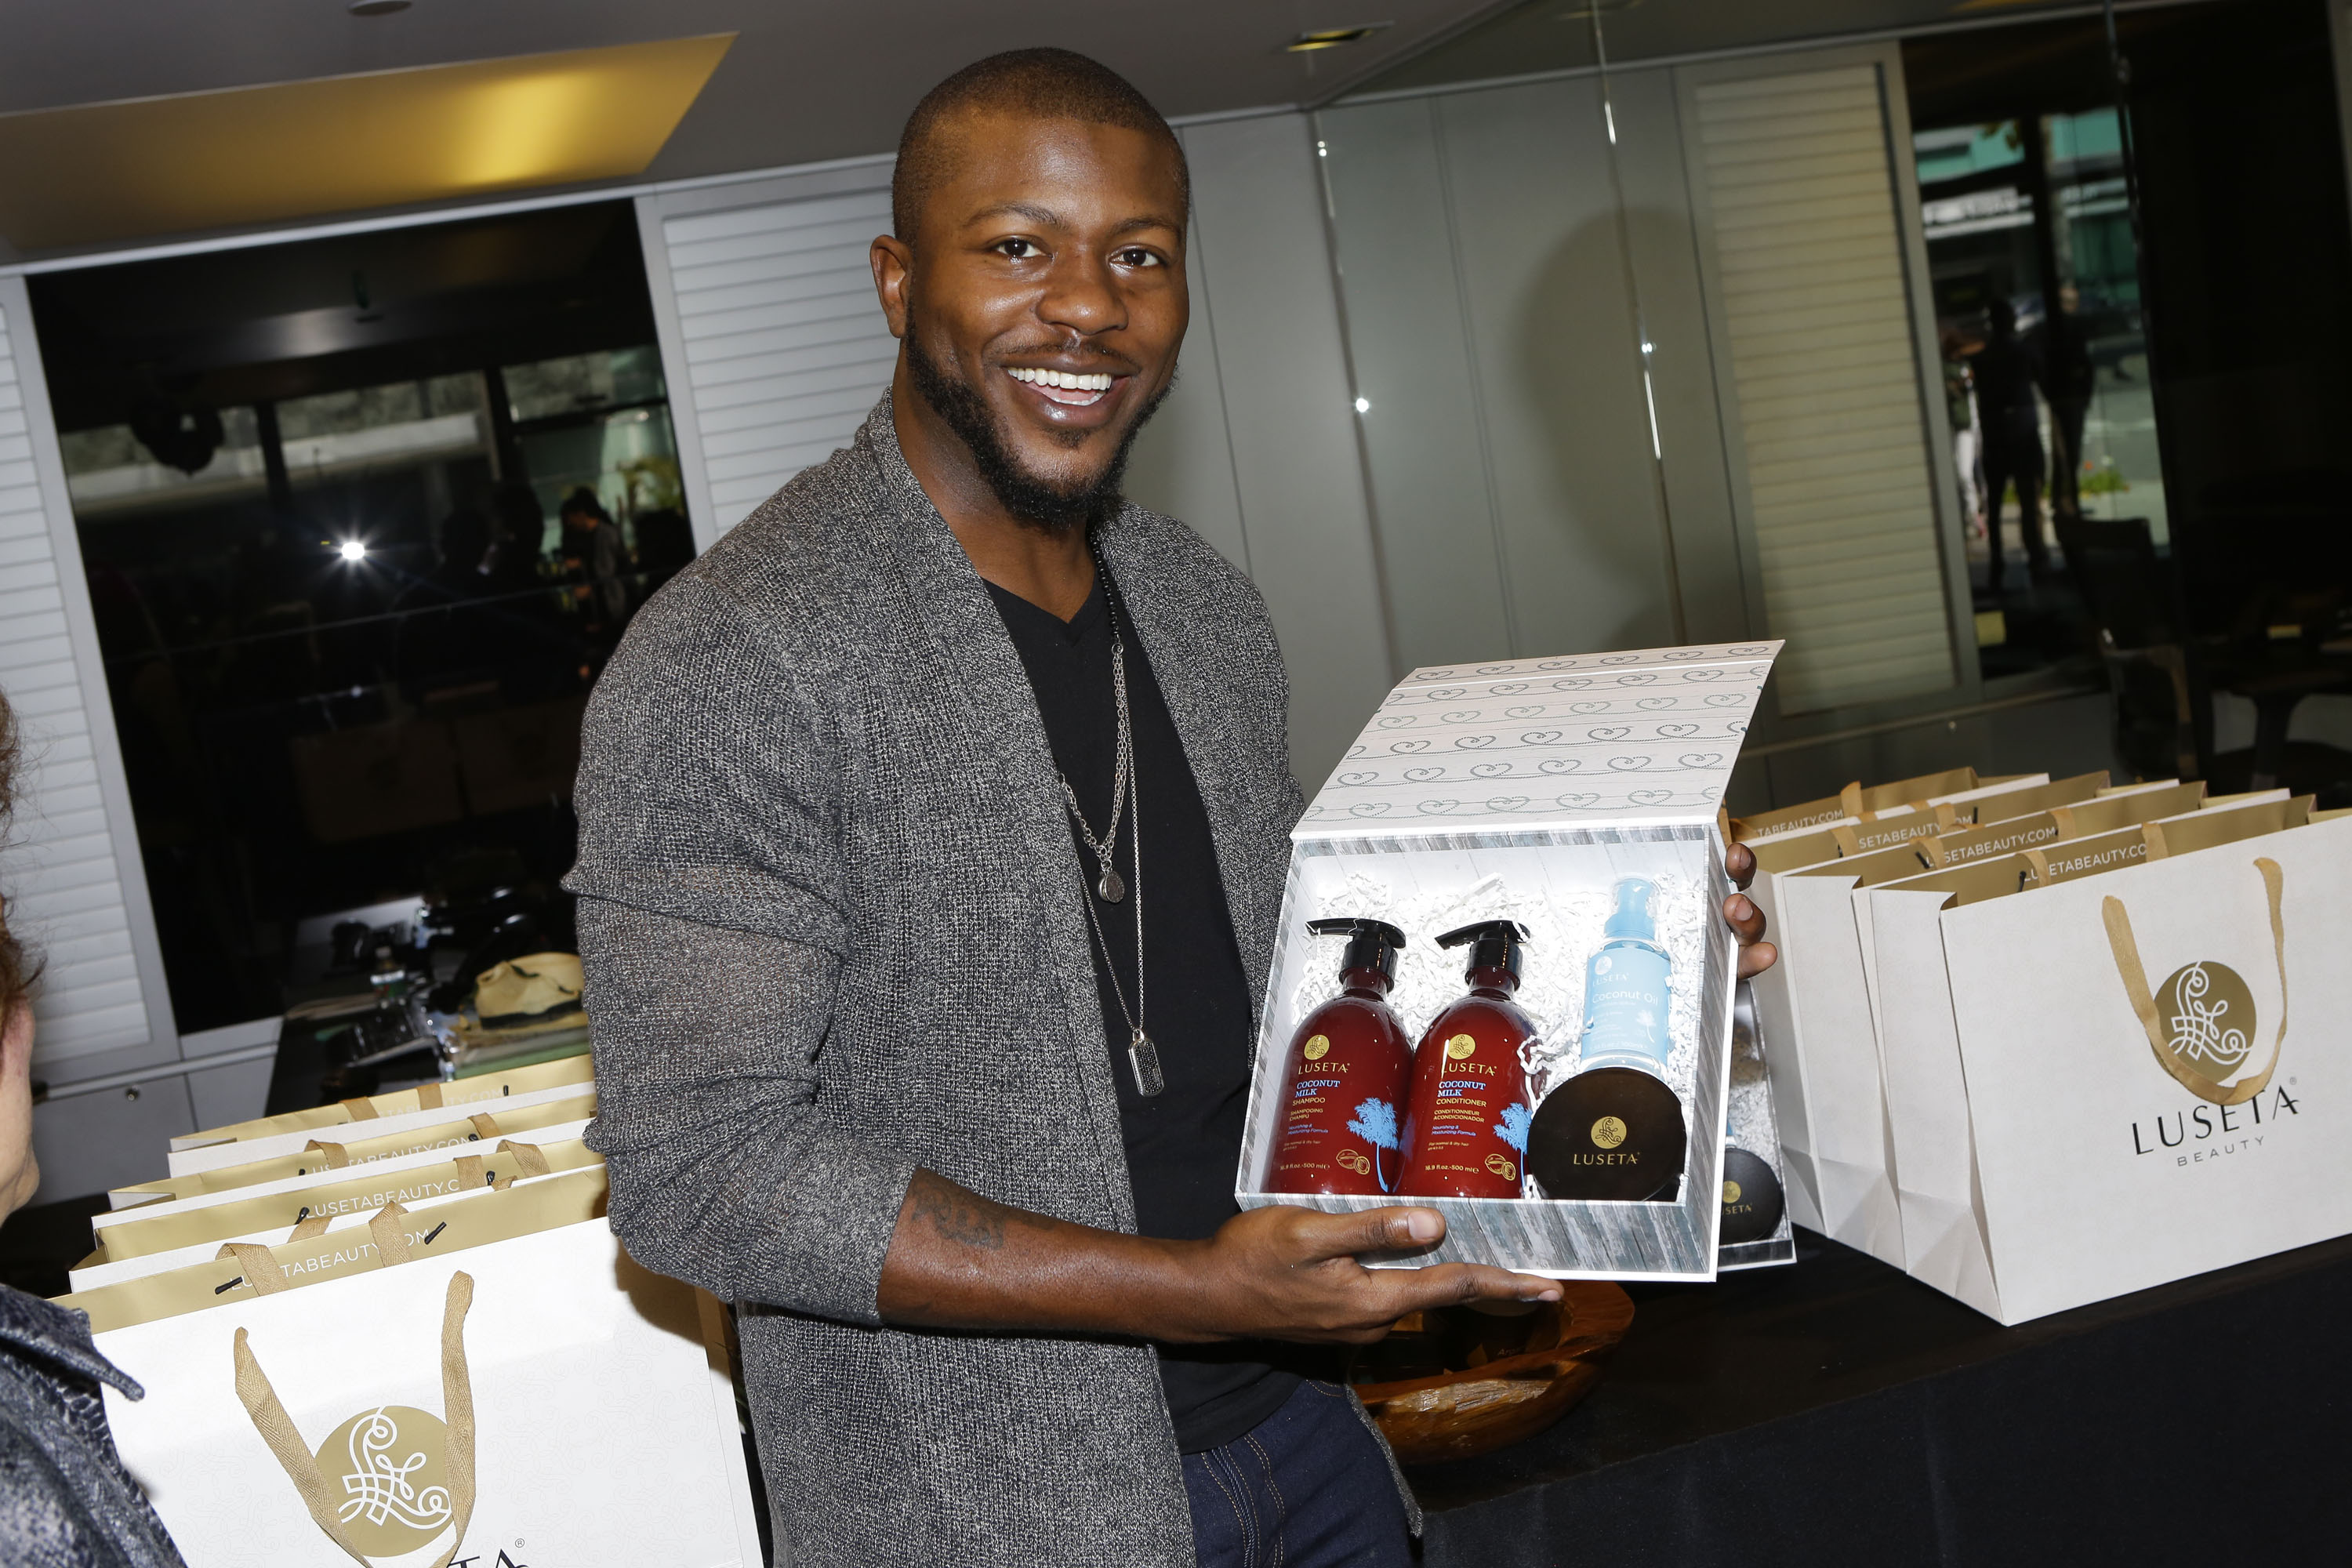 BEVERLY HILLS, CA - FEBRUARY 11: Actor Edwin Hodge attends the GBK Pre-Grammy Lounge at the McLaren Auto Gallery on February 11, 2017 in Beverly Hills, California. (Photo by Tiffany Rose/Getty Images for GBK)